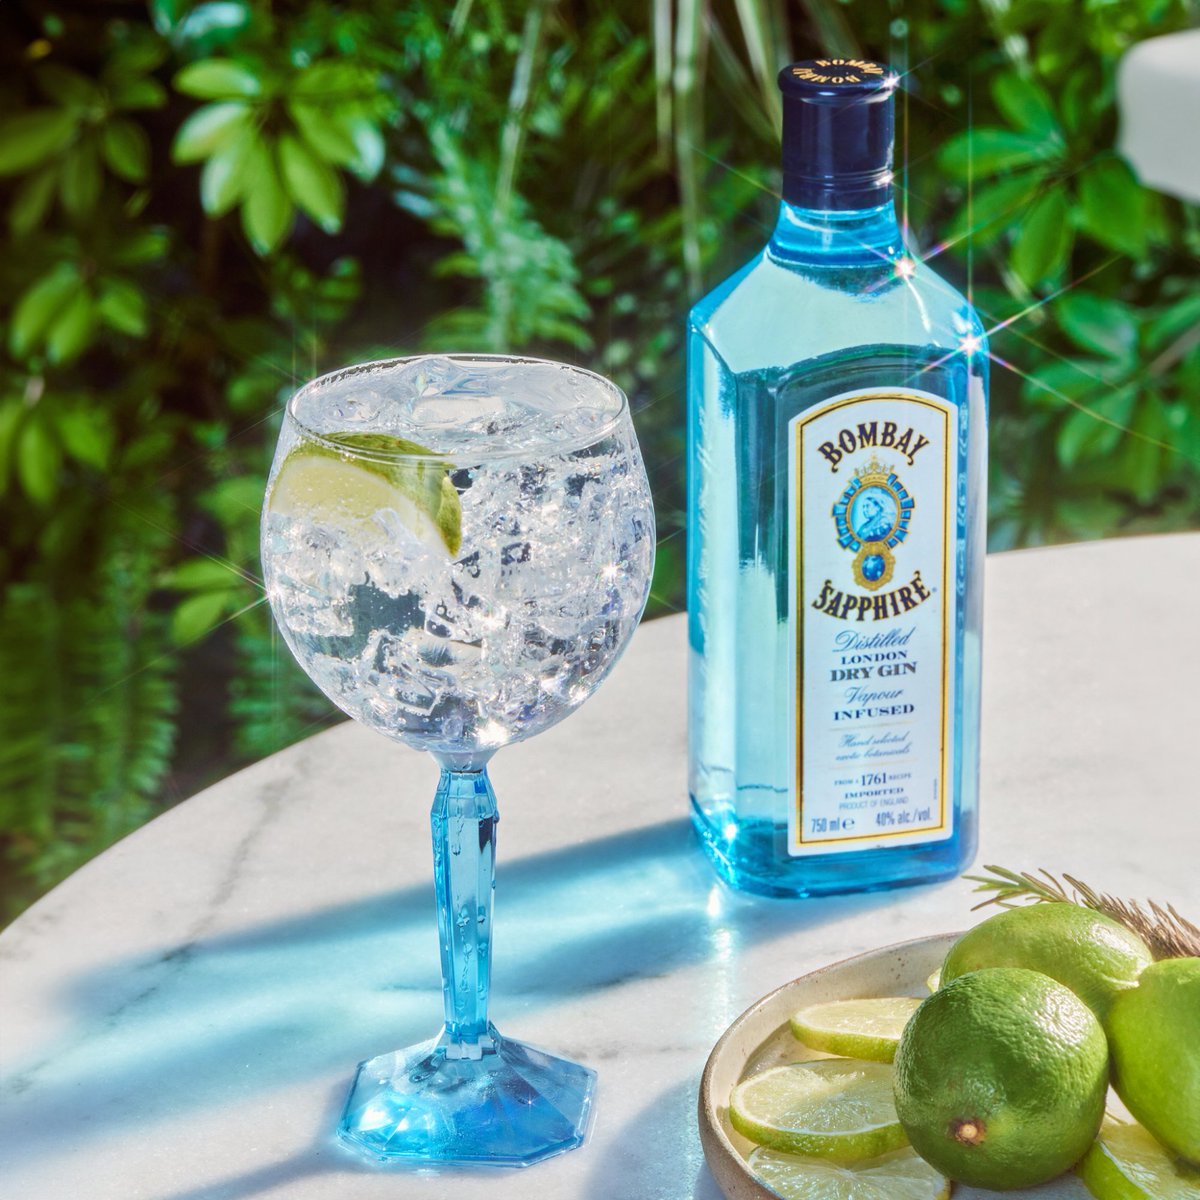 We know what you're cheersing with on National Gin and Tonic Day, or as we like to call it, National Bombay and Tonic Day. #BombaySapphire #StirCreativity #NationalGinTonicDay More recipes here: bit.ly/BOMBAYRecipes